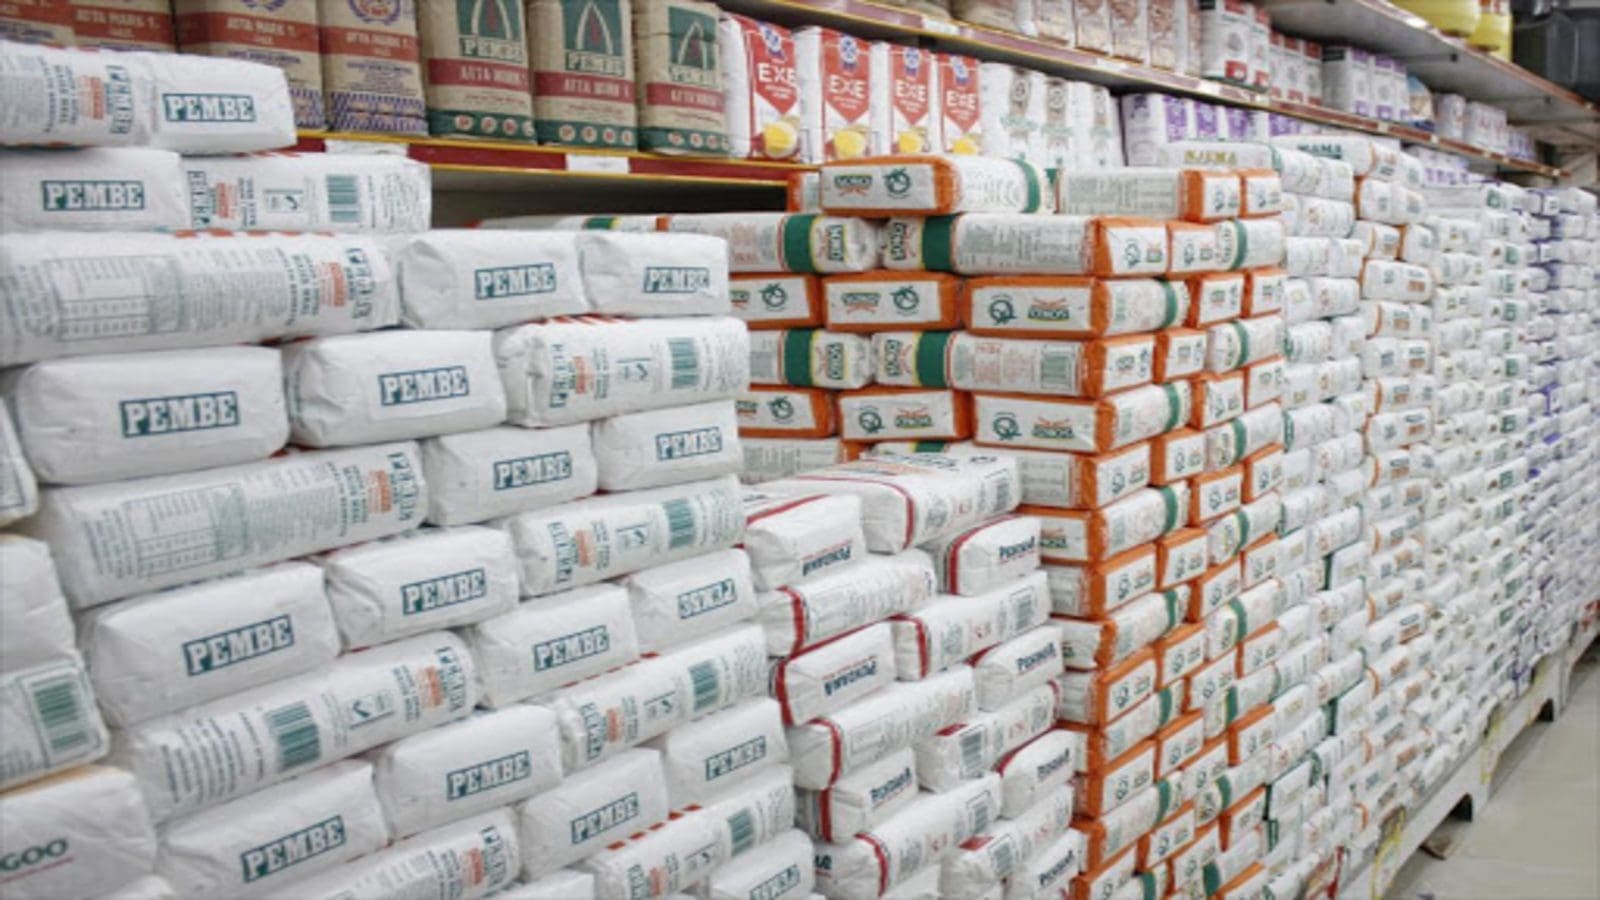 Over 20 millers summoned by the agriculture CS over maize meal prices in Kenya